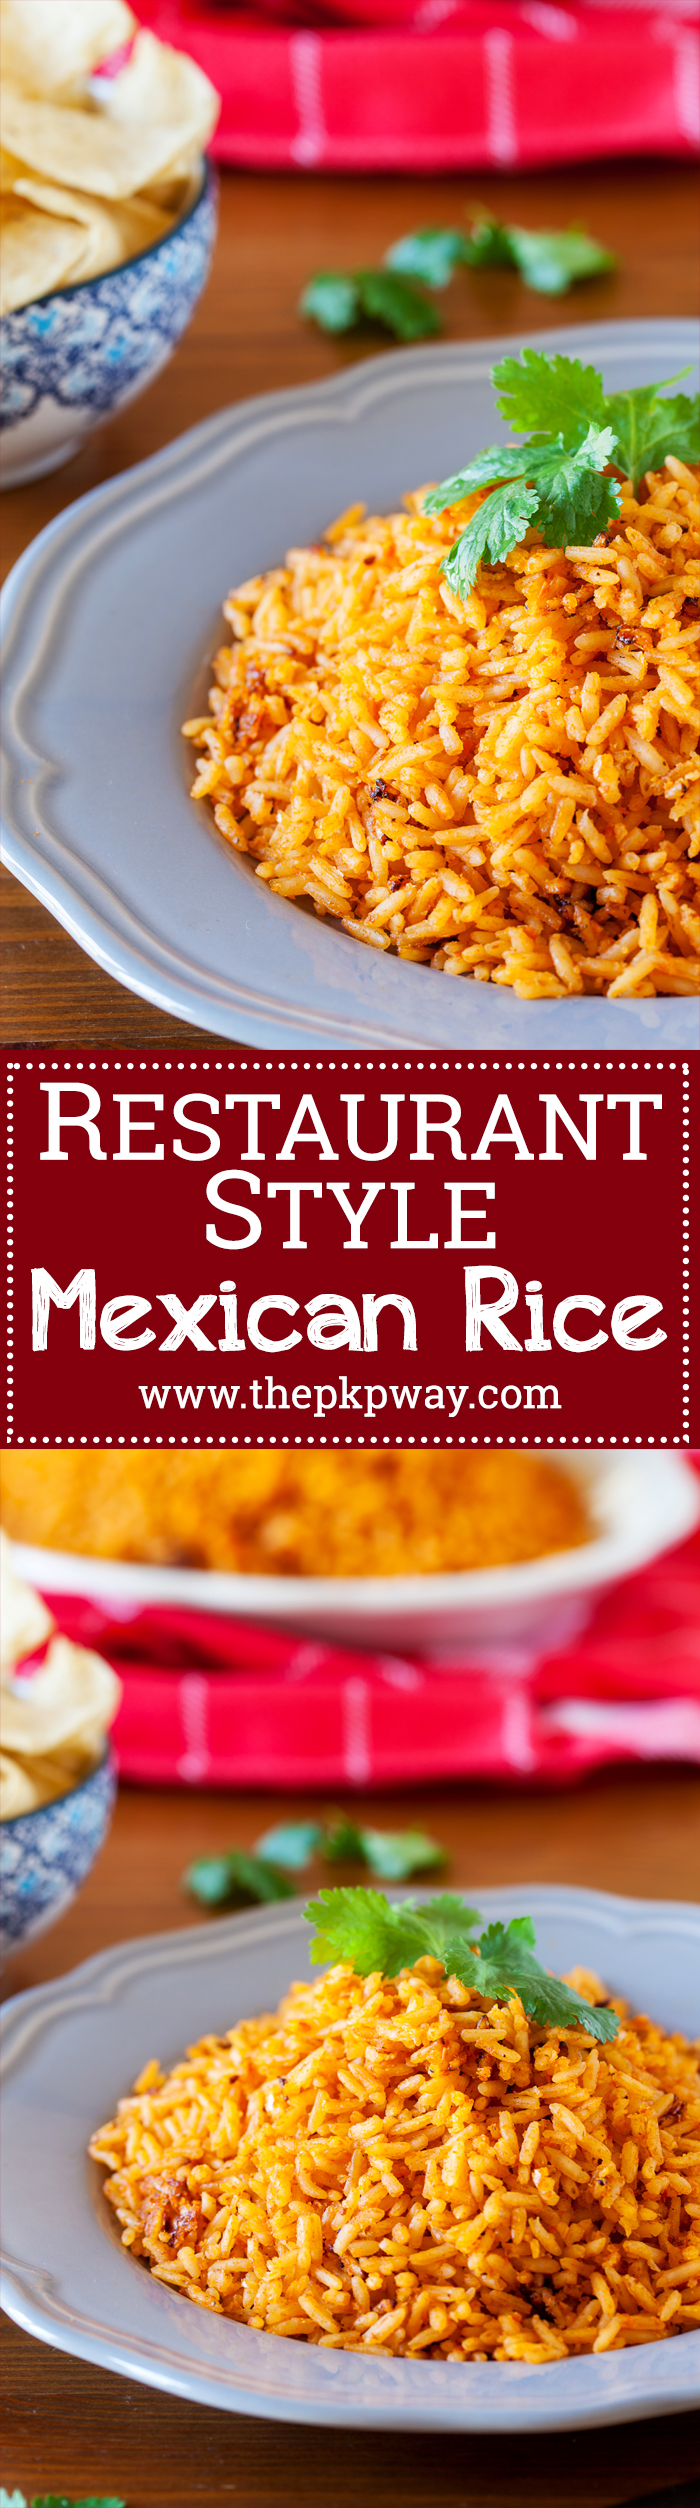 Authentic Restaurant Style Mexican Rice ready in 25 minutes! Or, 7 minutes when using my shortcut!